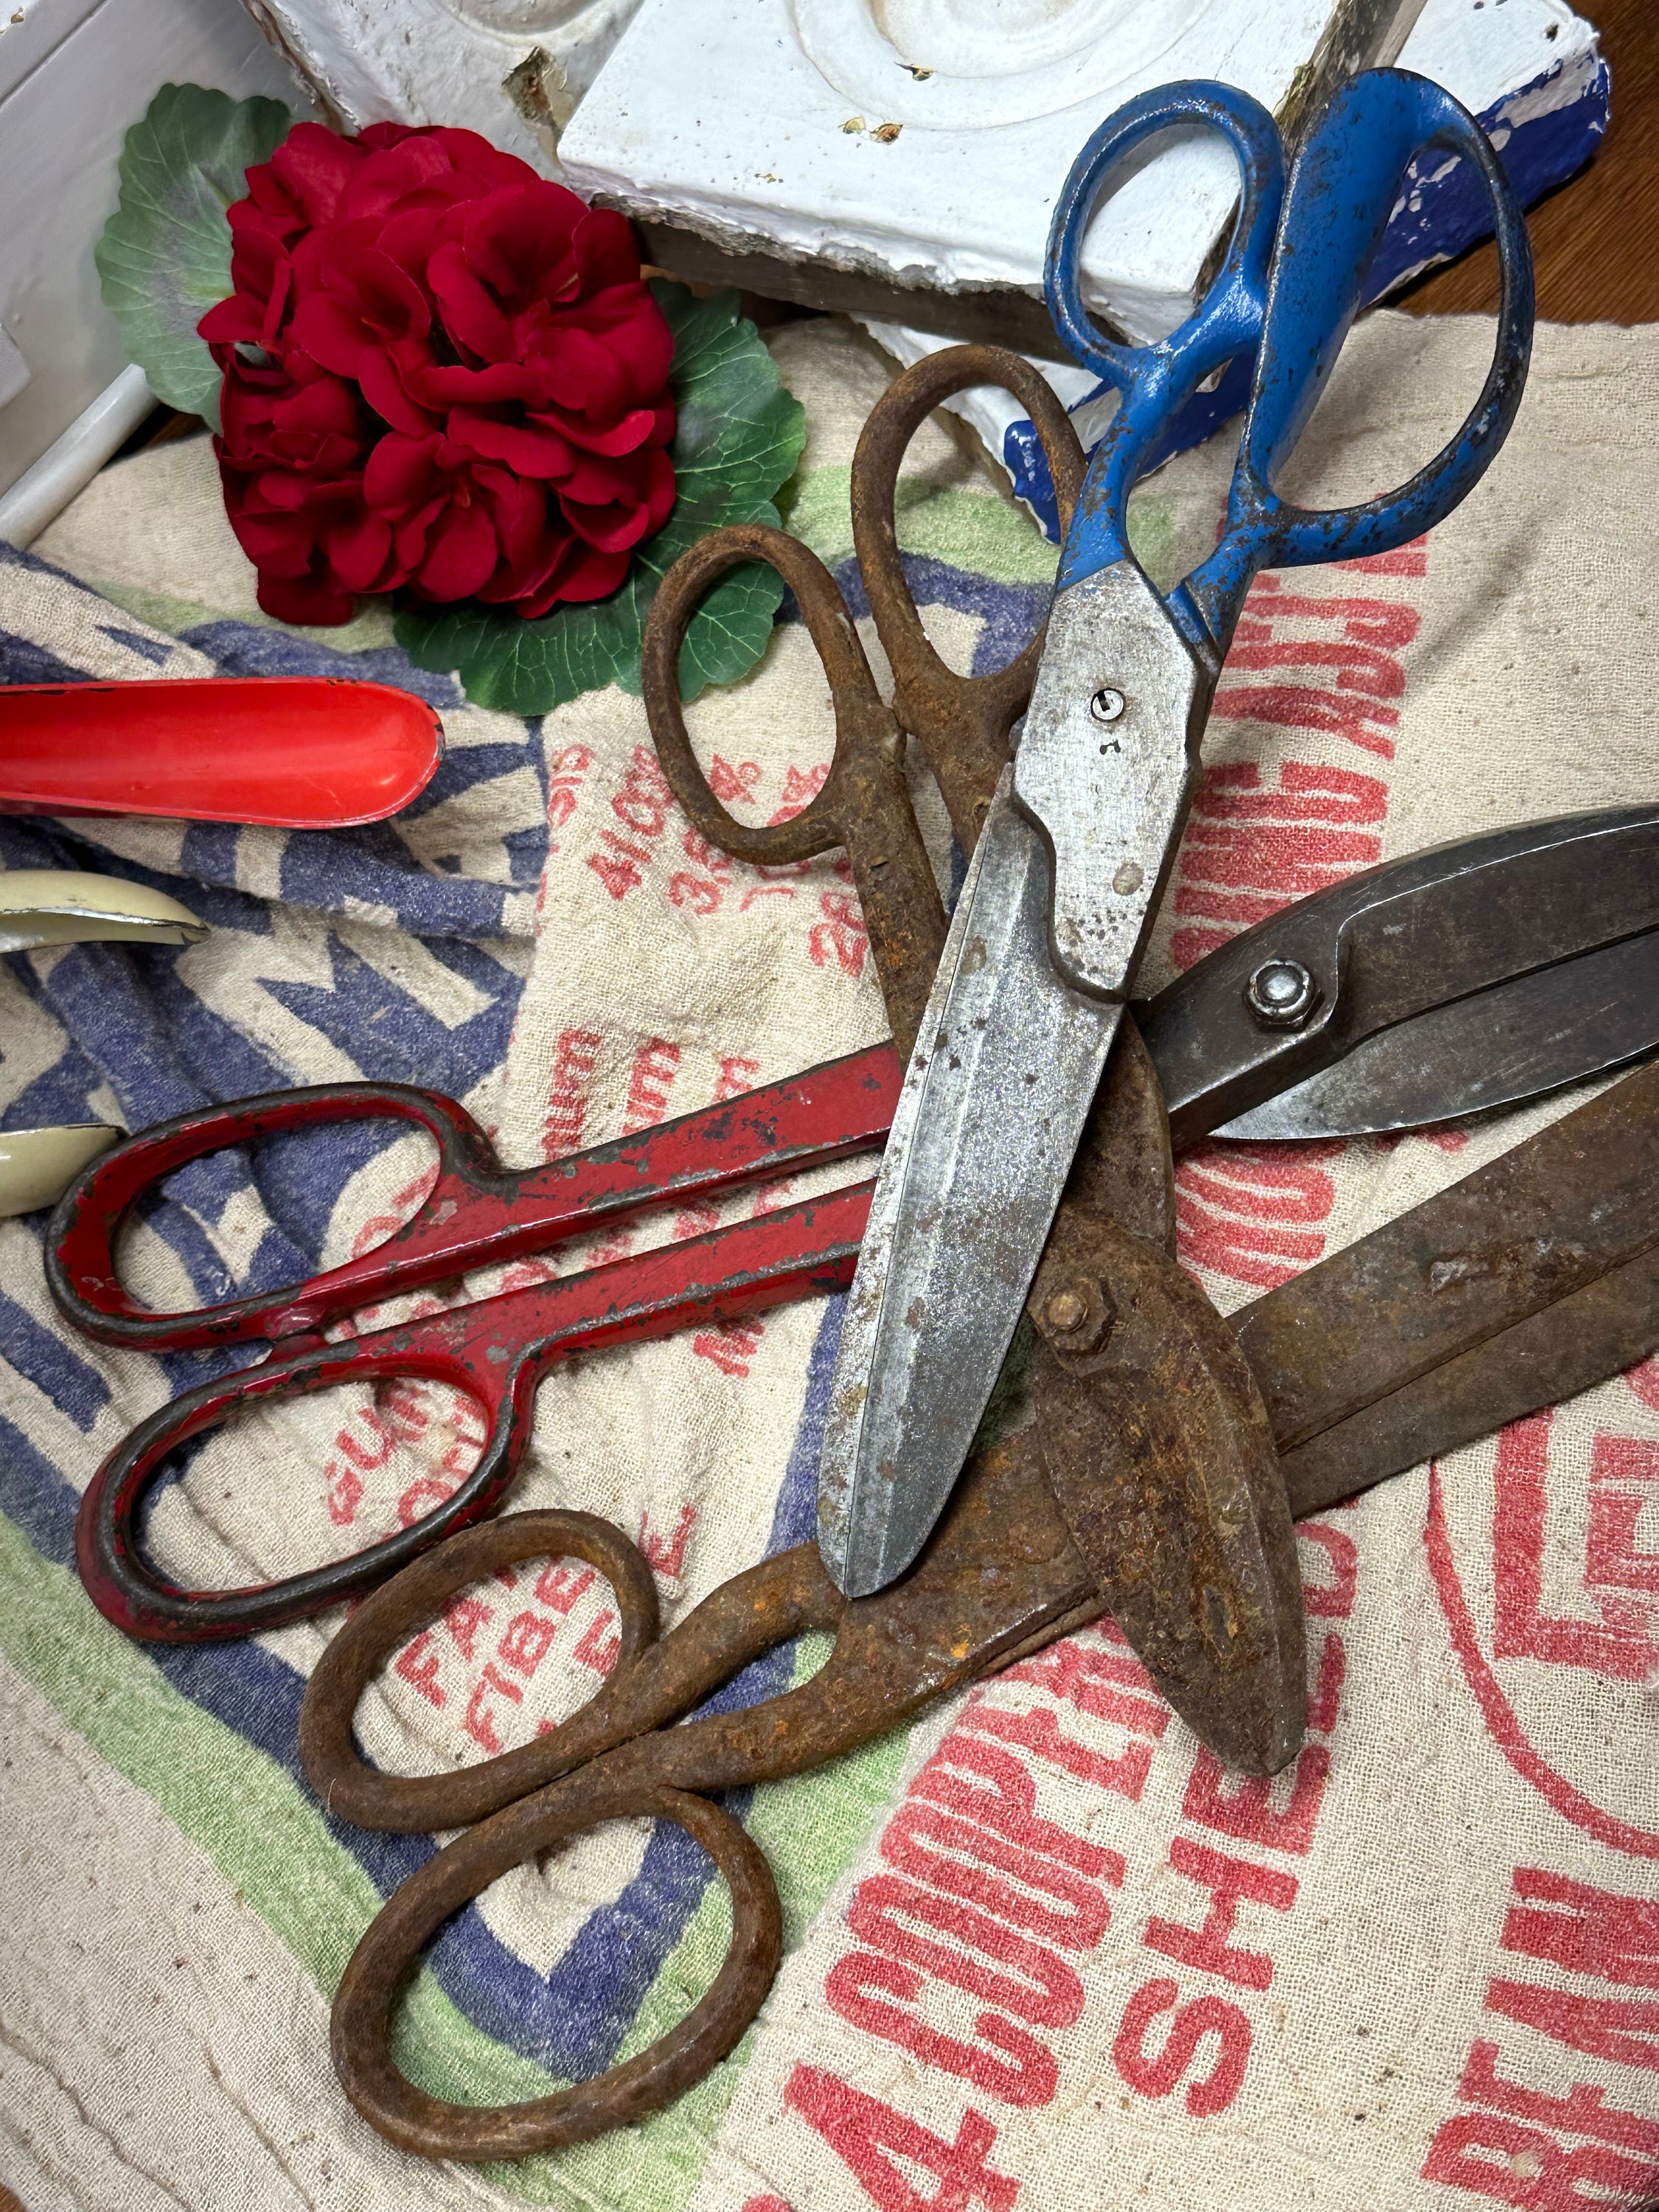 Vintage Scissors. Mixed Lot of Shears, Vintage Cutlery, Old Craft